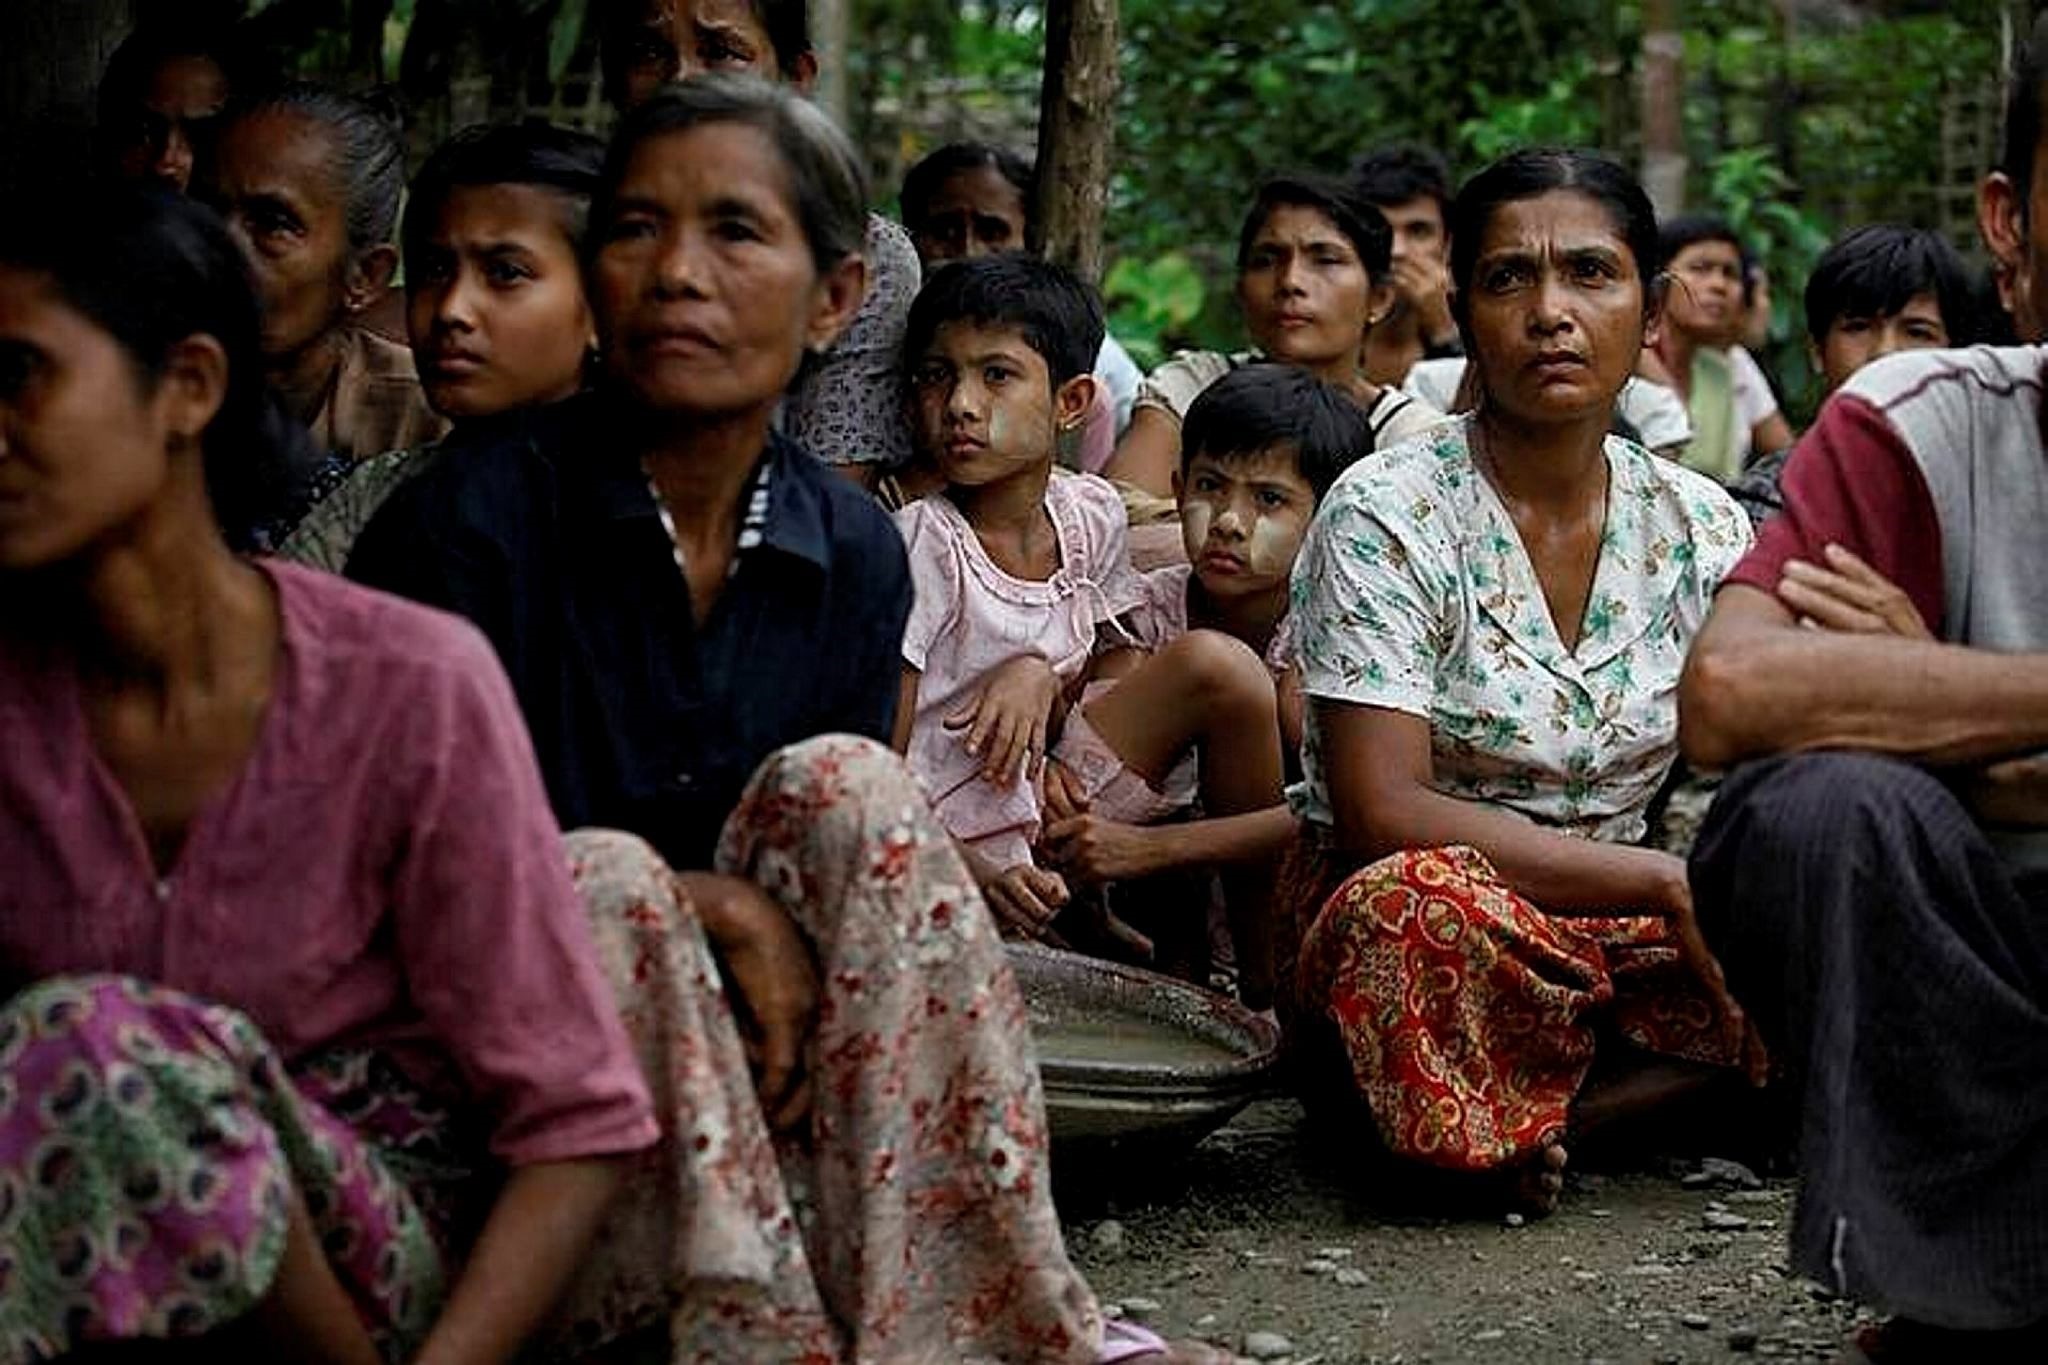 Rohingya Muslums sit in a temporary refugee camp after losing their homes during the violence in the Rakhine state.